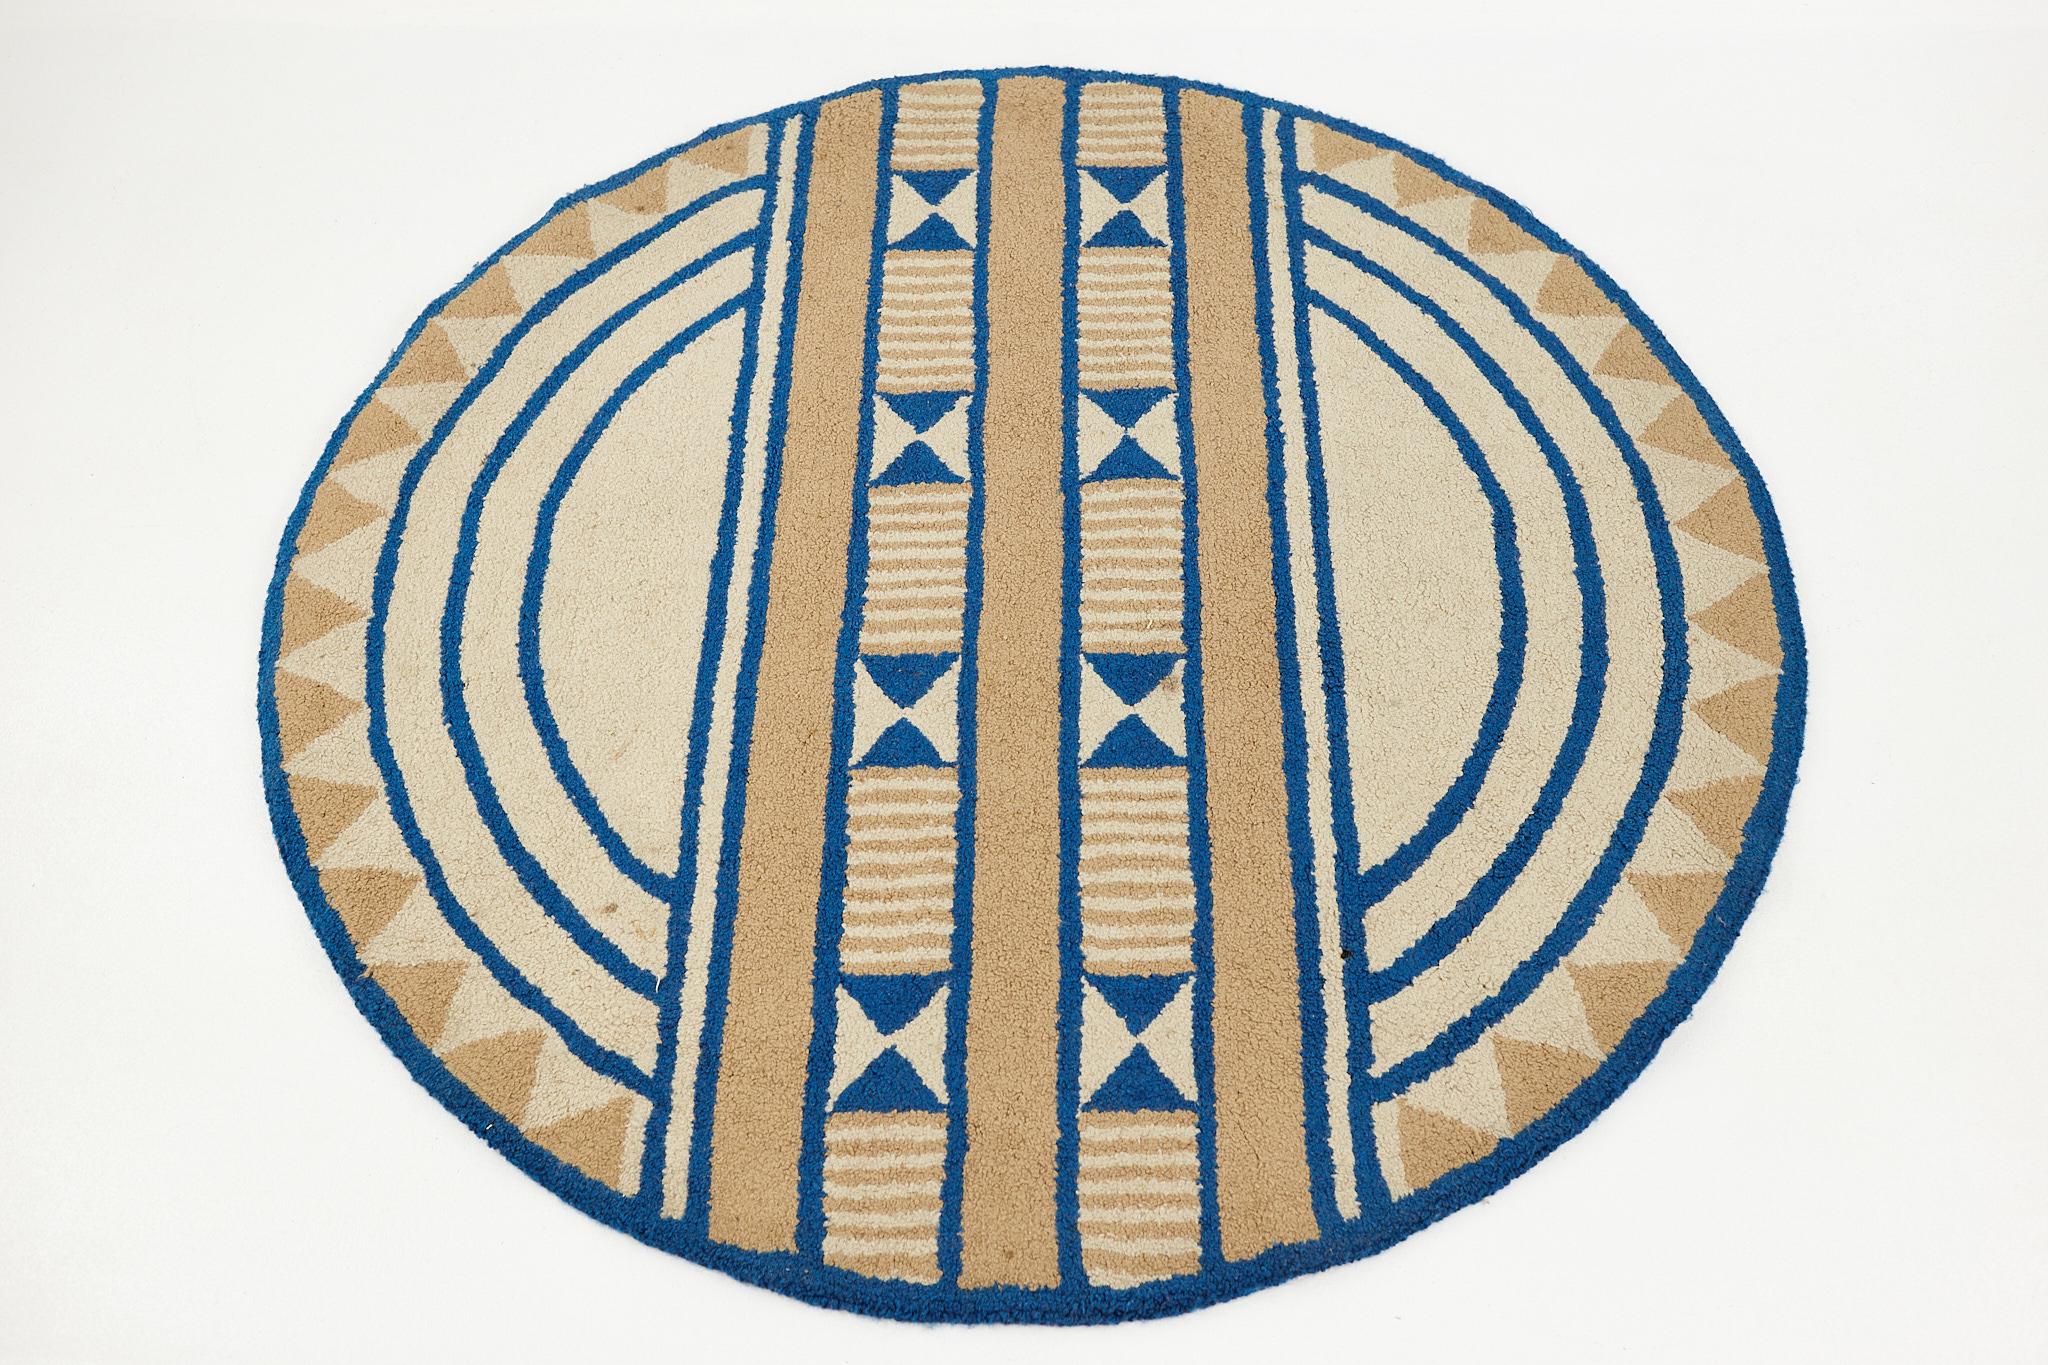 Mid century Acrylic high pile blue and beige round rug

This rug is in good vintage condition

This rug measures: 72 wide x 72 inches deep

We take our photos in a controlled lighting studio to show as much detail as possible. We do not